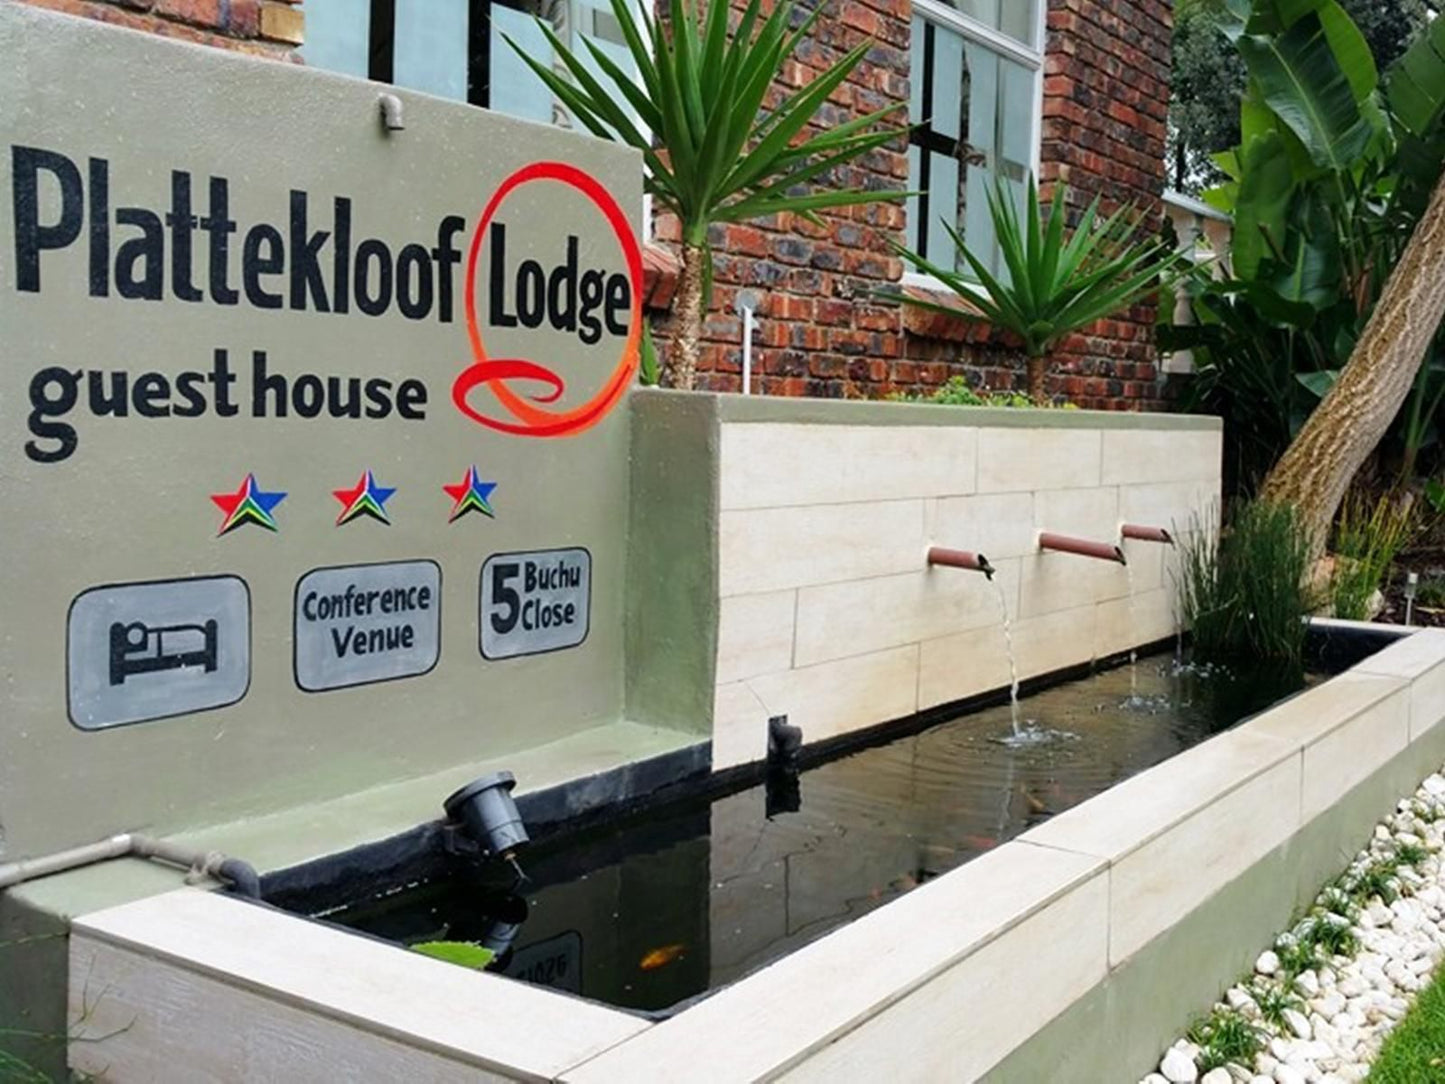 Plattekloof Premium Lodge Plattekloof Cape Town Western Cape South Africa Boat, Vehicle, House, Building, Architecture, River, Nature, Waters, Sign, Garden, Plant, Rain, Swimming Pool